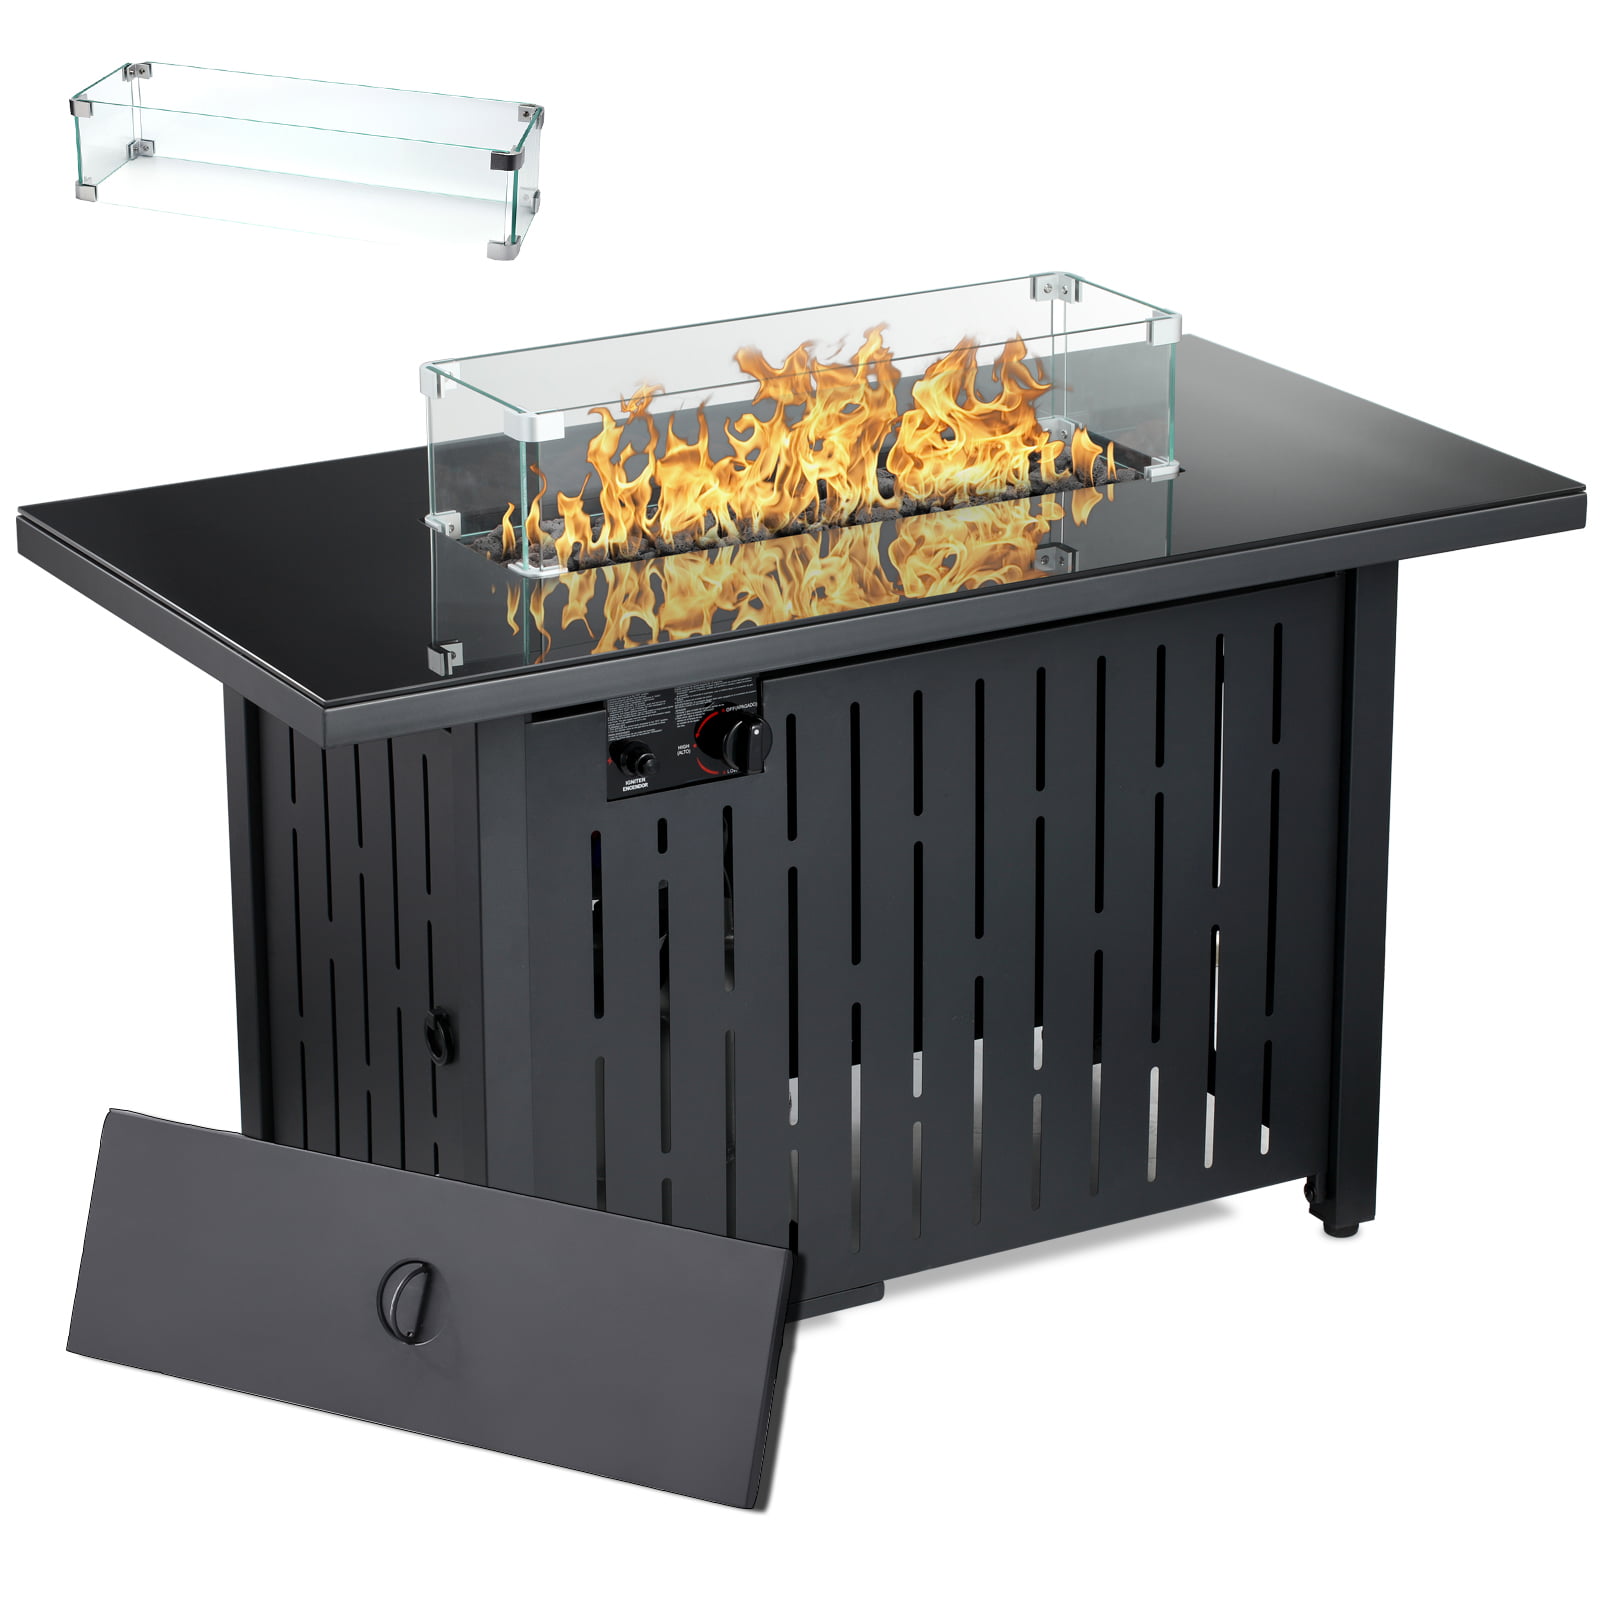 50000 BTU Outdoor Fire Table with Auto Ignition Tempered Glass Top UPHA 43 inch Propane Fire Pit Table Rattan & Wicker Fire Dining Table for Patio Backyard Deck,CSA Certification Glass Wind Guard 